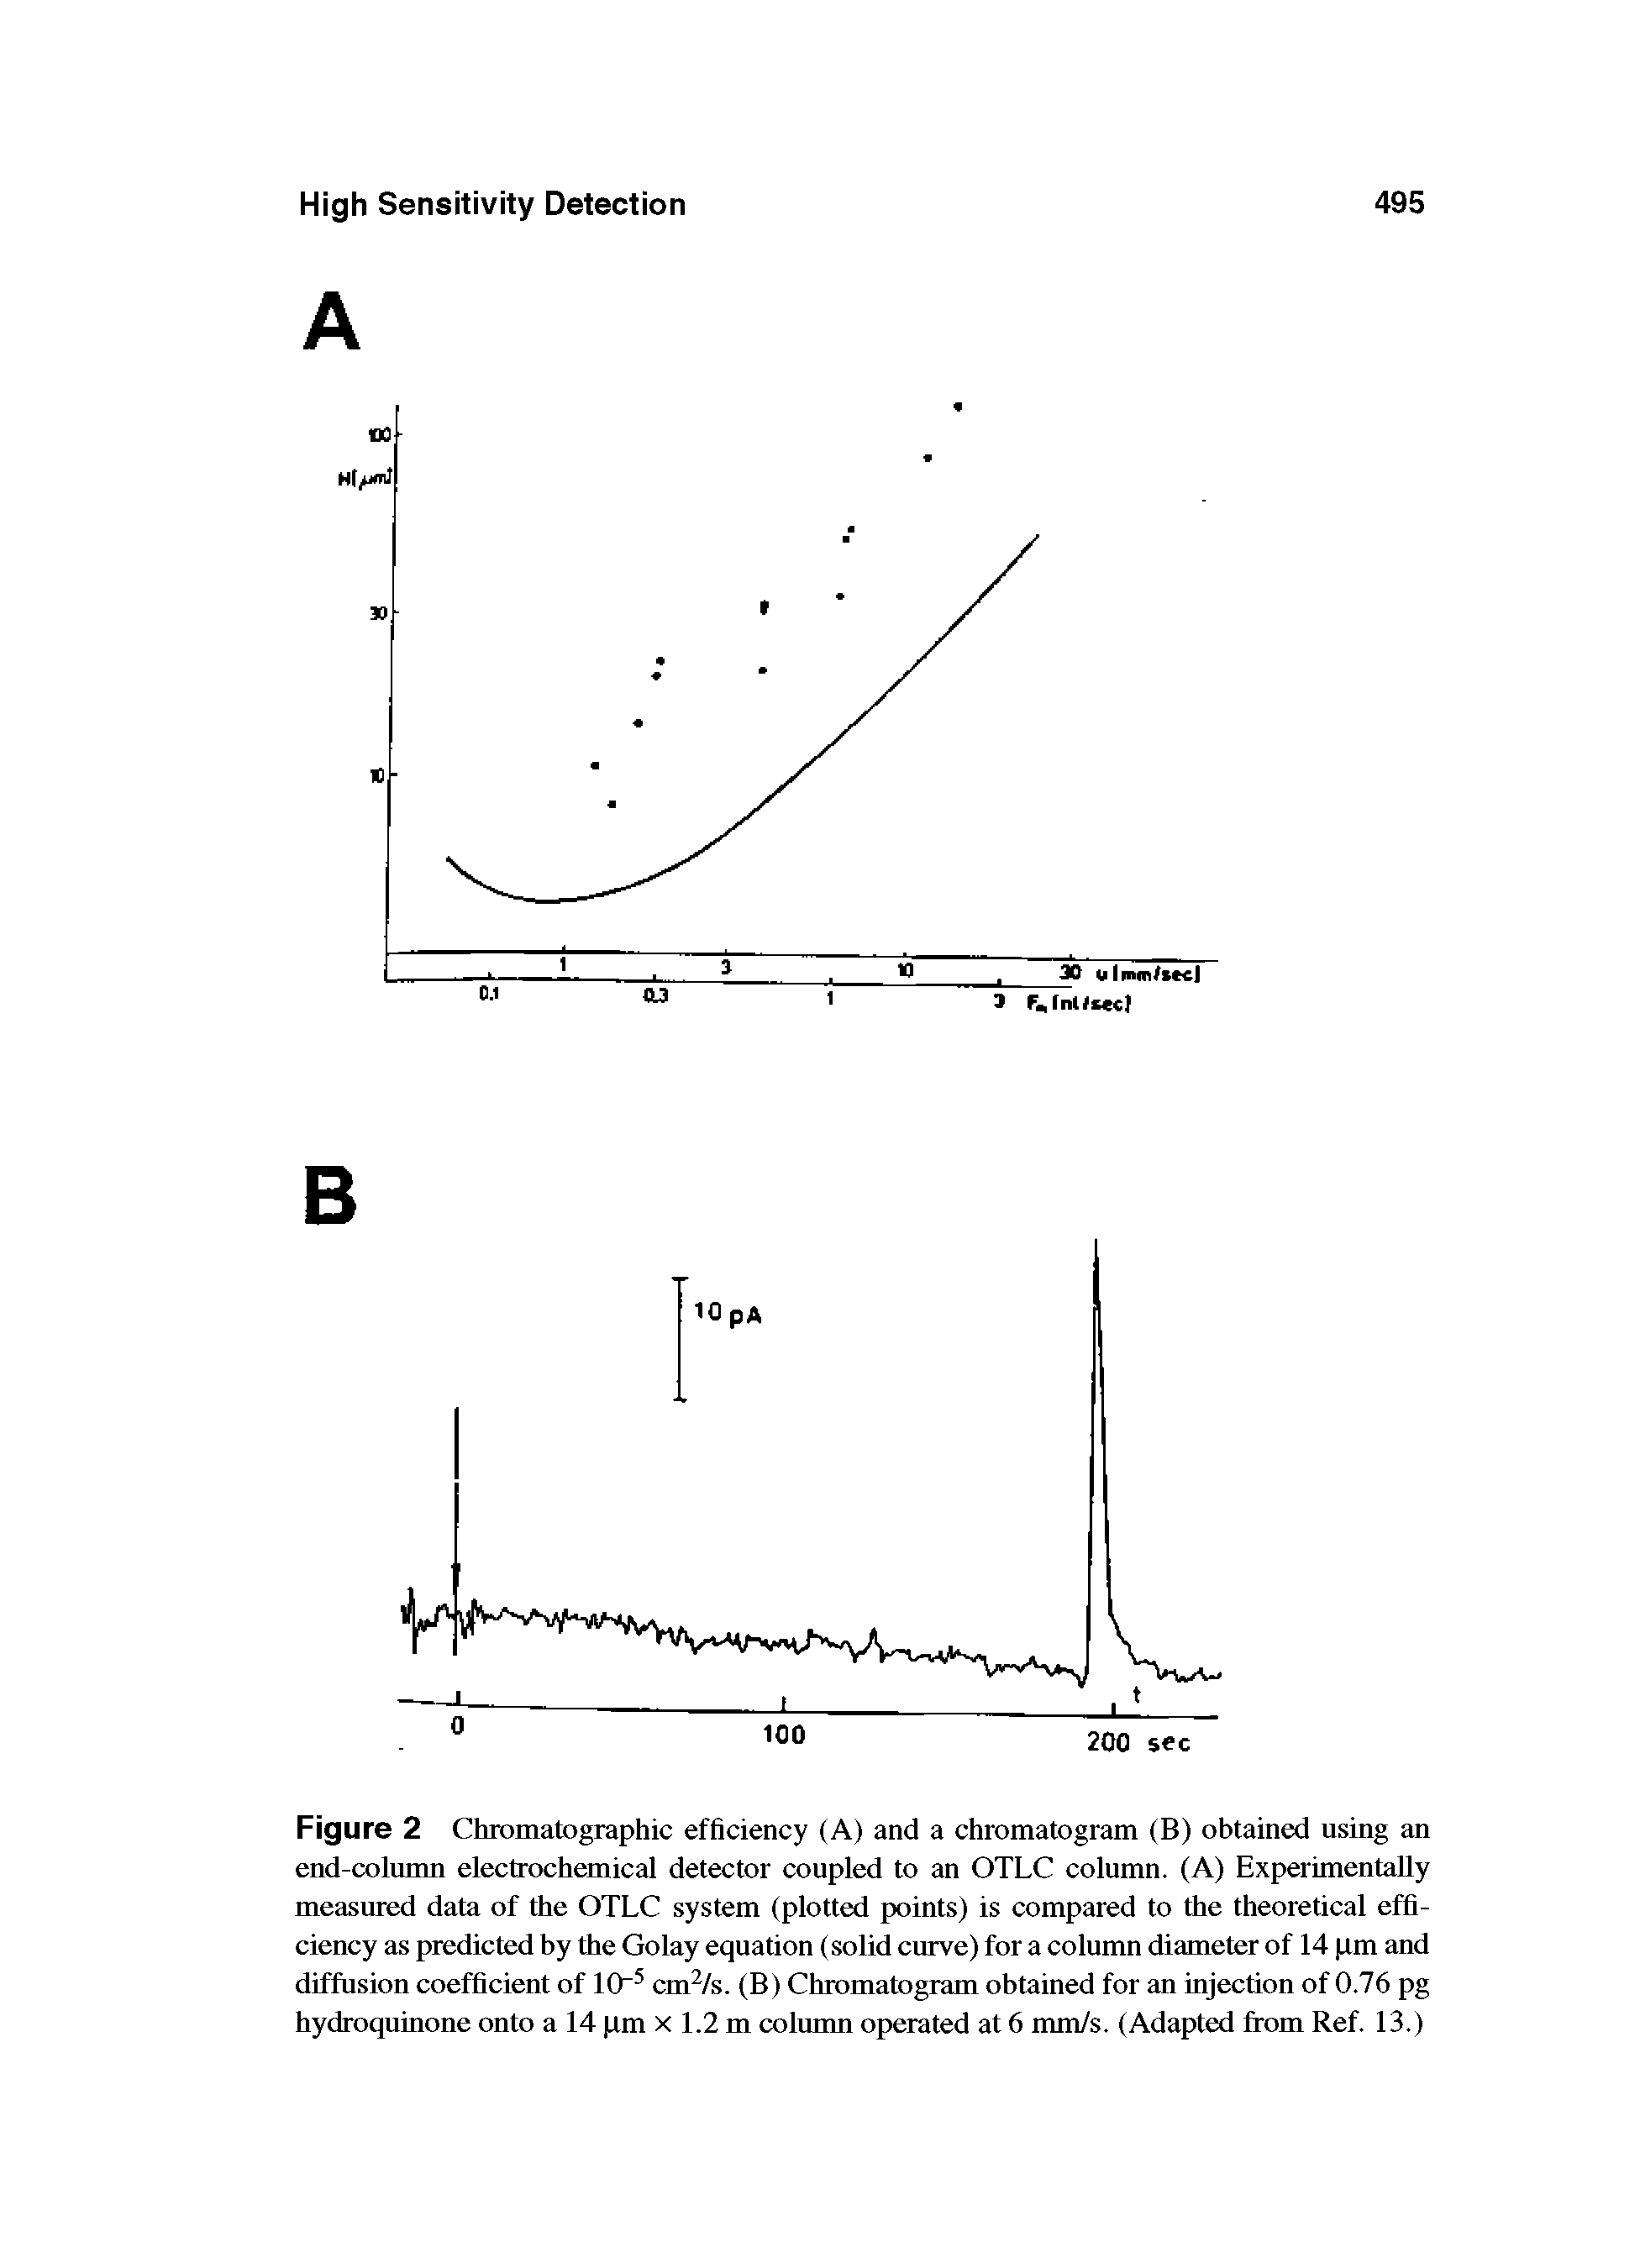 Figure 2 Chromatographic efficiency (A) and a chromatogram (B) obtained using an end-column electrochemical detector coupled to an OTLC column. (A) Experimentally measured data of the OTLC system (plotted points) is compared to the theoretical efficiency as predicted by the Golay equation (solid eurve) for a column diameter of 14 pm and diffusion coefficient of 10 cmVs. (B) Chromatogram obtained for an injection of 0.76 pg hydroquinone onto a 14 pm x 1.2 m column operated at 6 mm/s. (Adapted from Ref. 13.)...